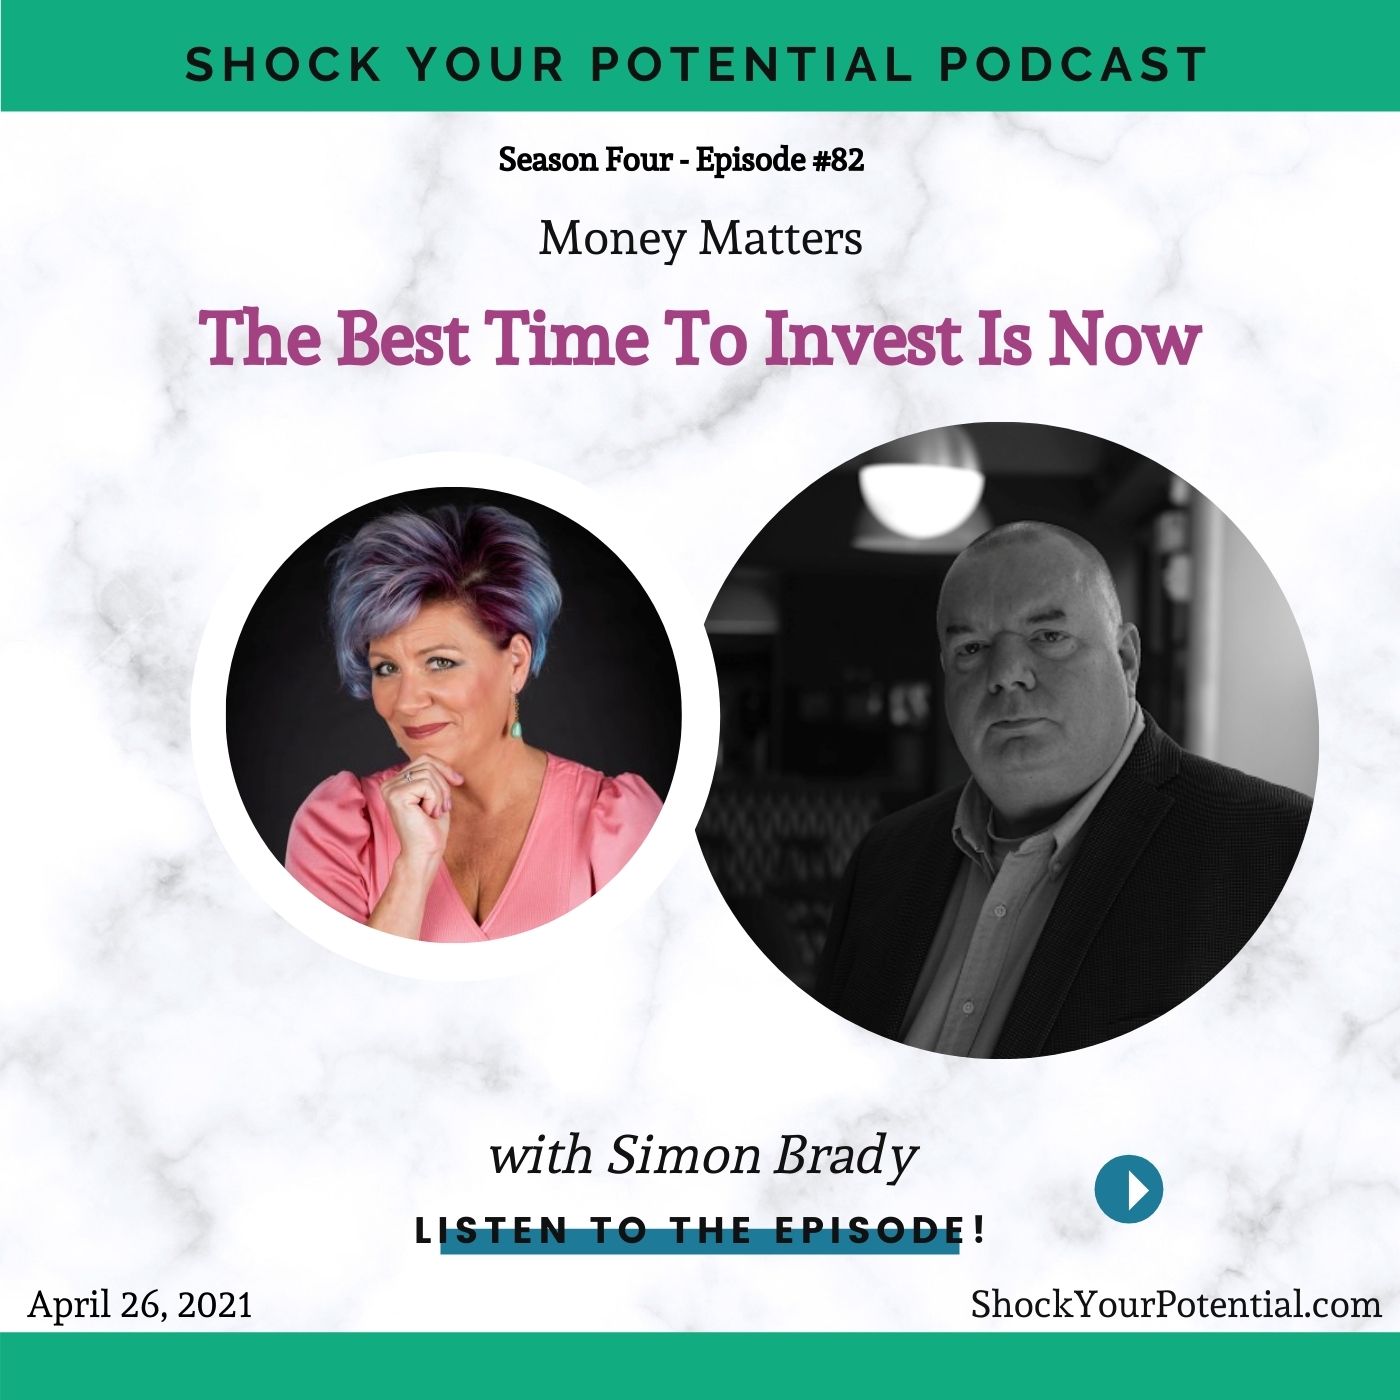 The Best Time To Invest Is Now – Simon Brady